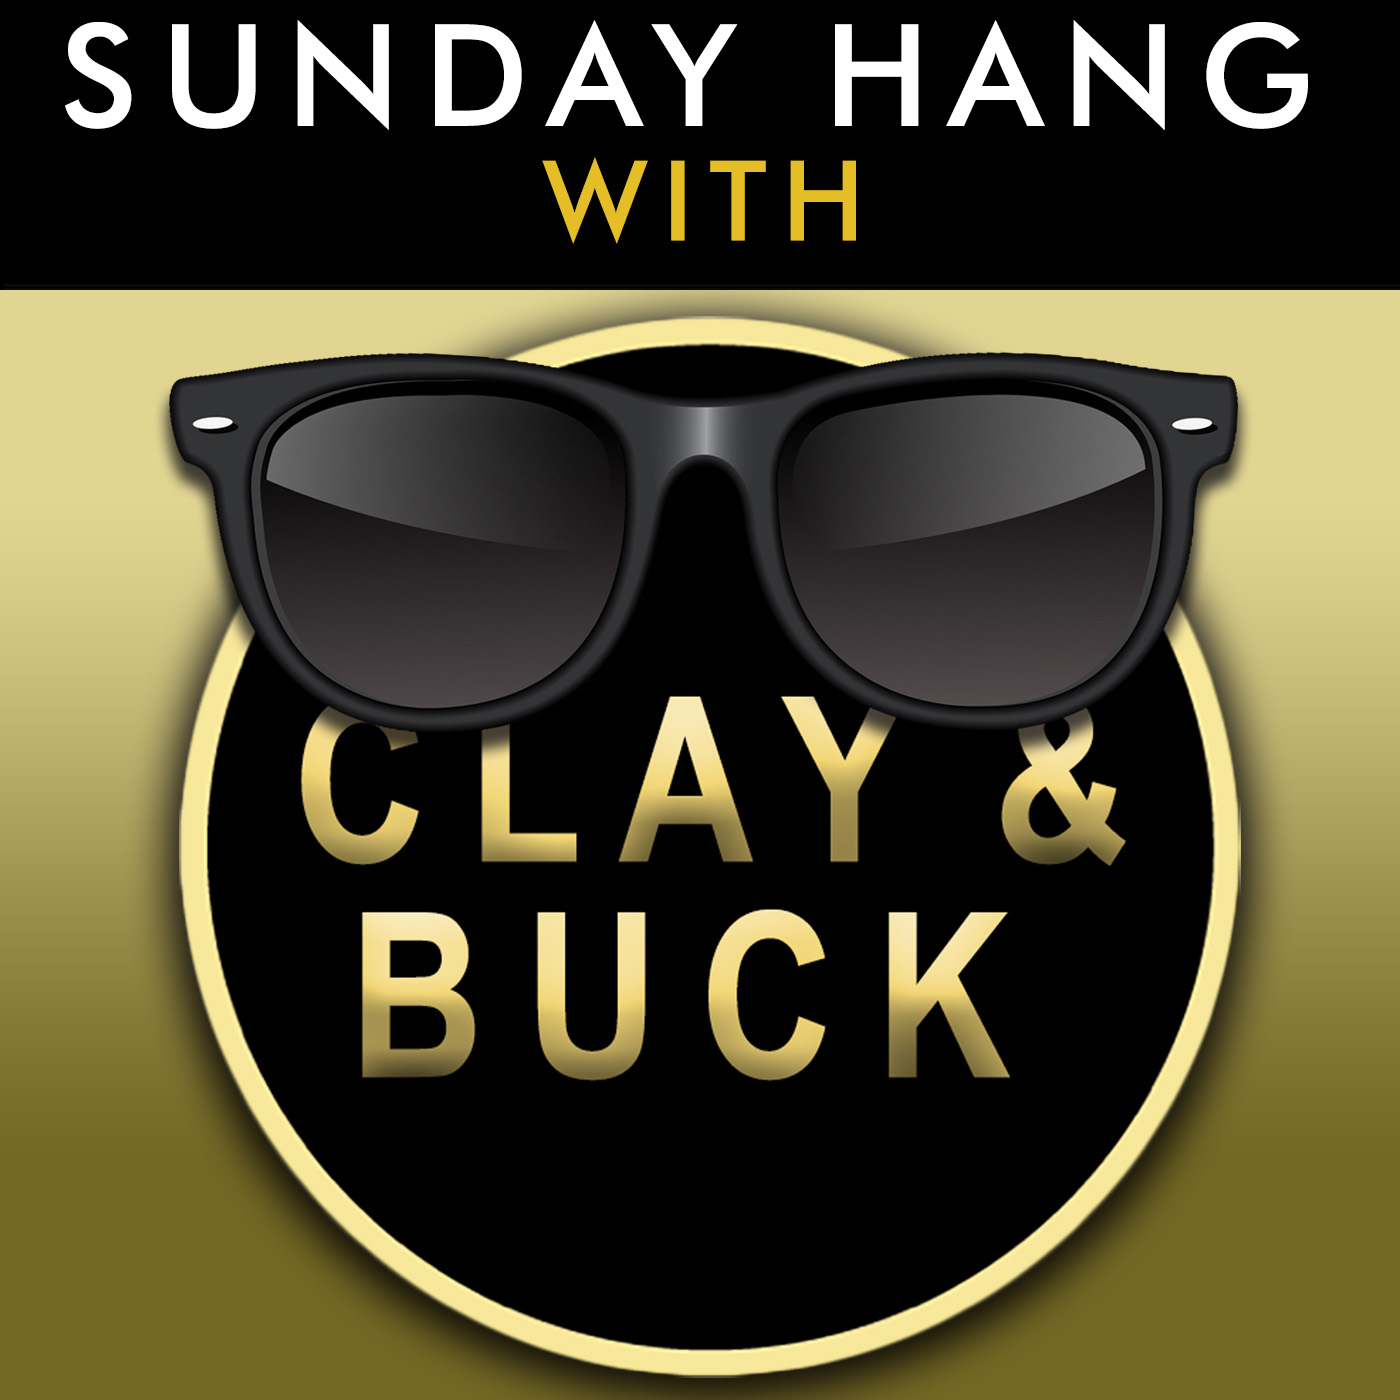 Sunday Hang with Clay and Buck - Dec 17 2023